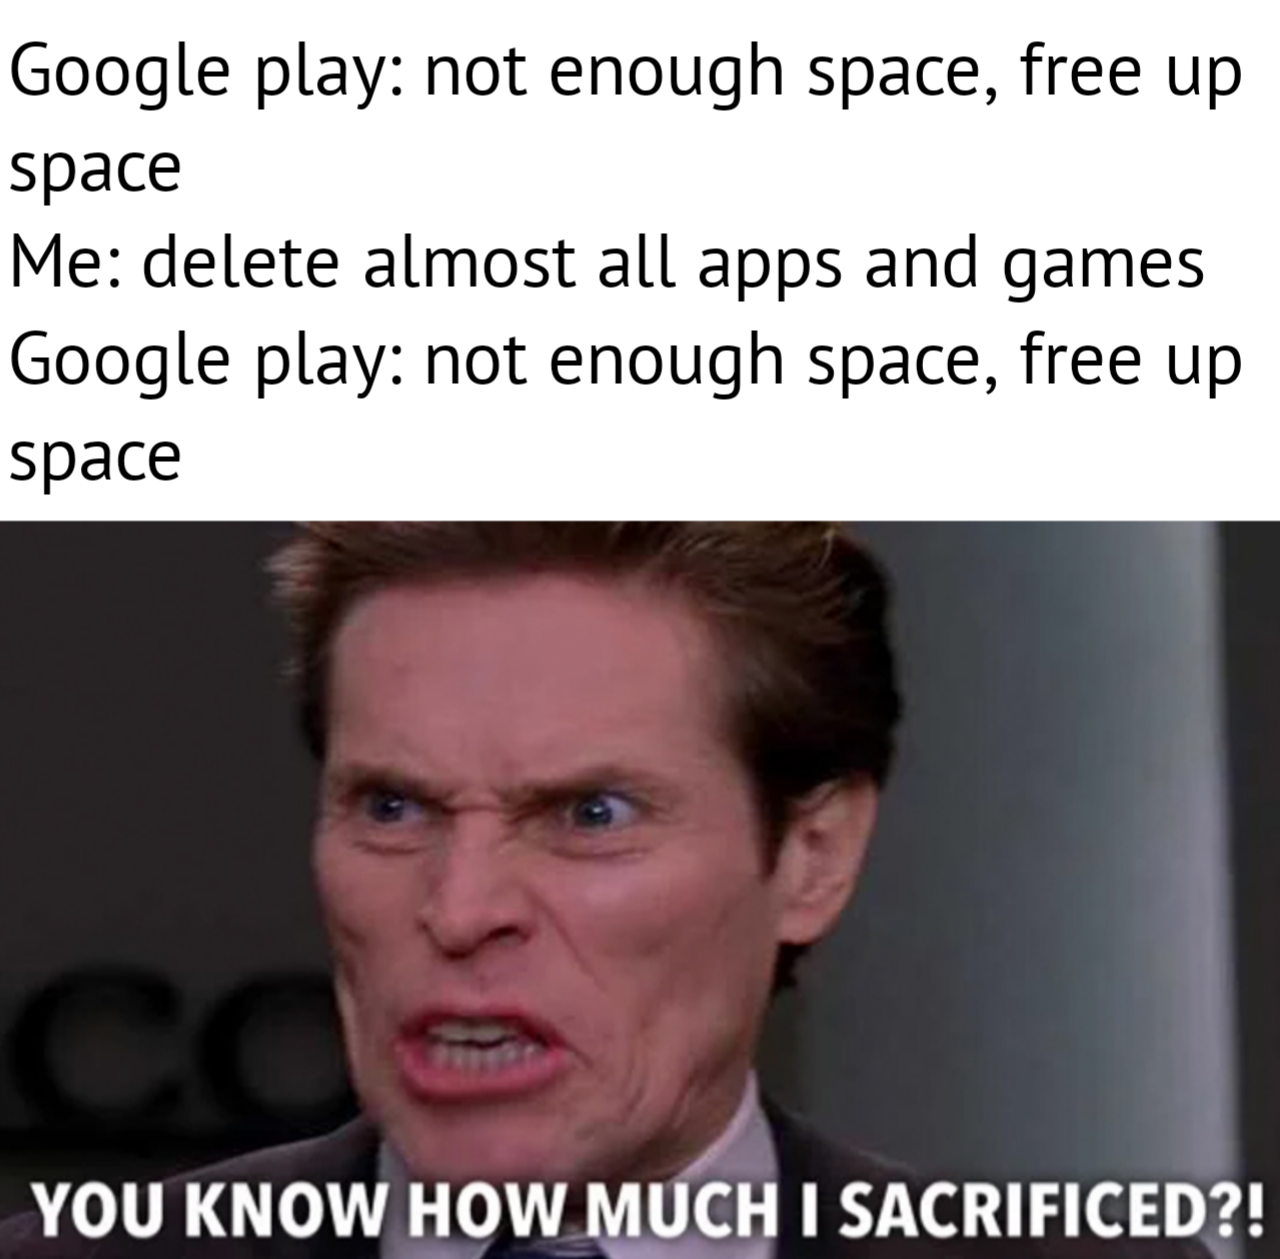 photo caption - Google play not enough space, free up space Me delete almost all apps and games Google play not enough space, free up space co You Know How Much I Sacrificed?!